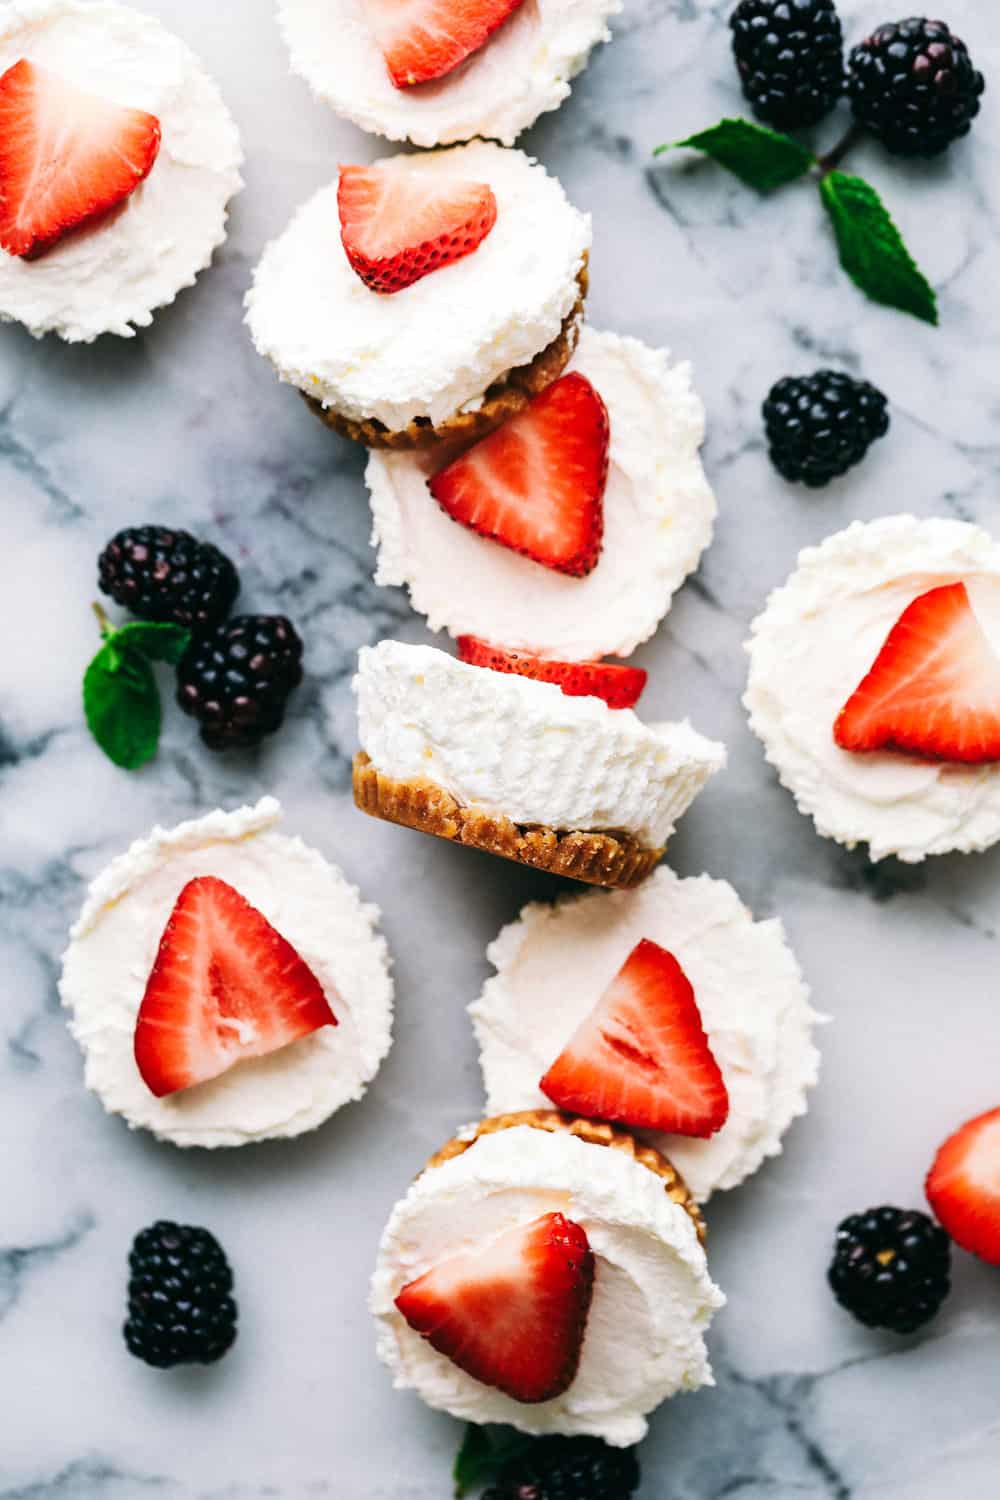 Skinny Mini Cheesecake bites on a marble counter with black berries between.